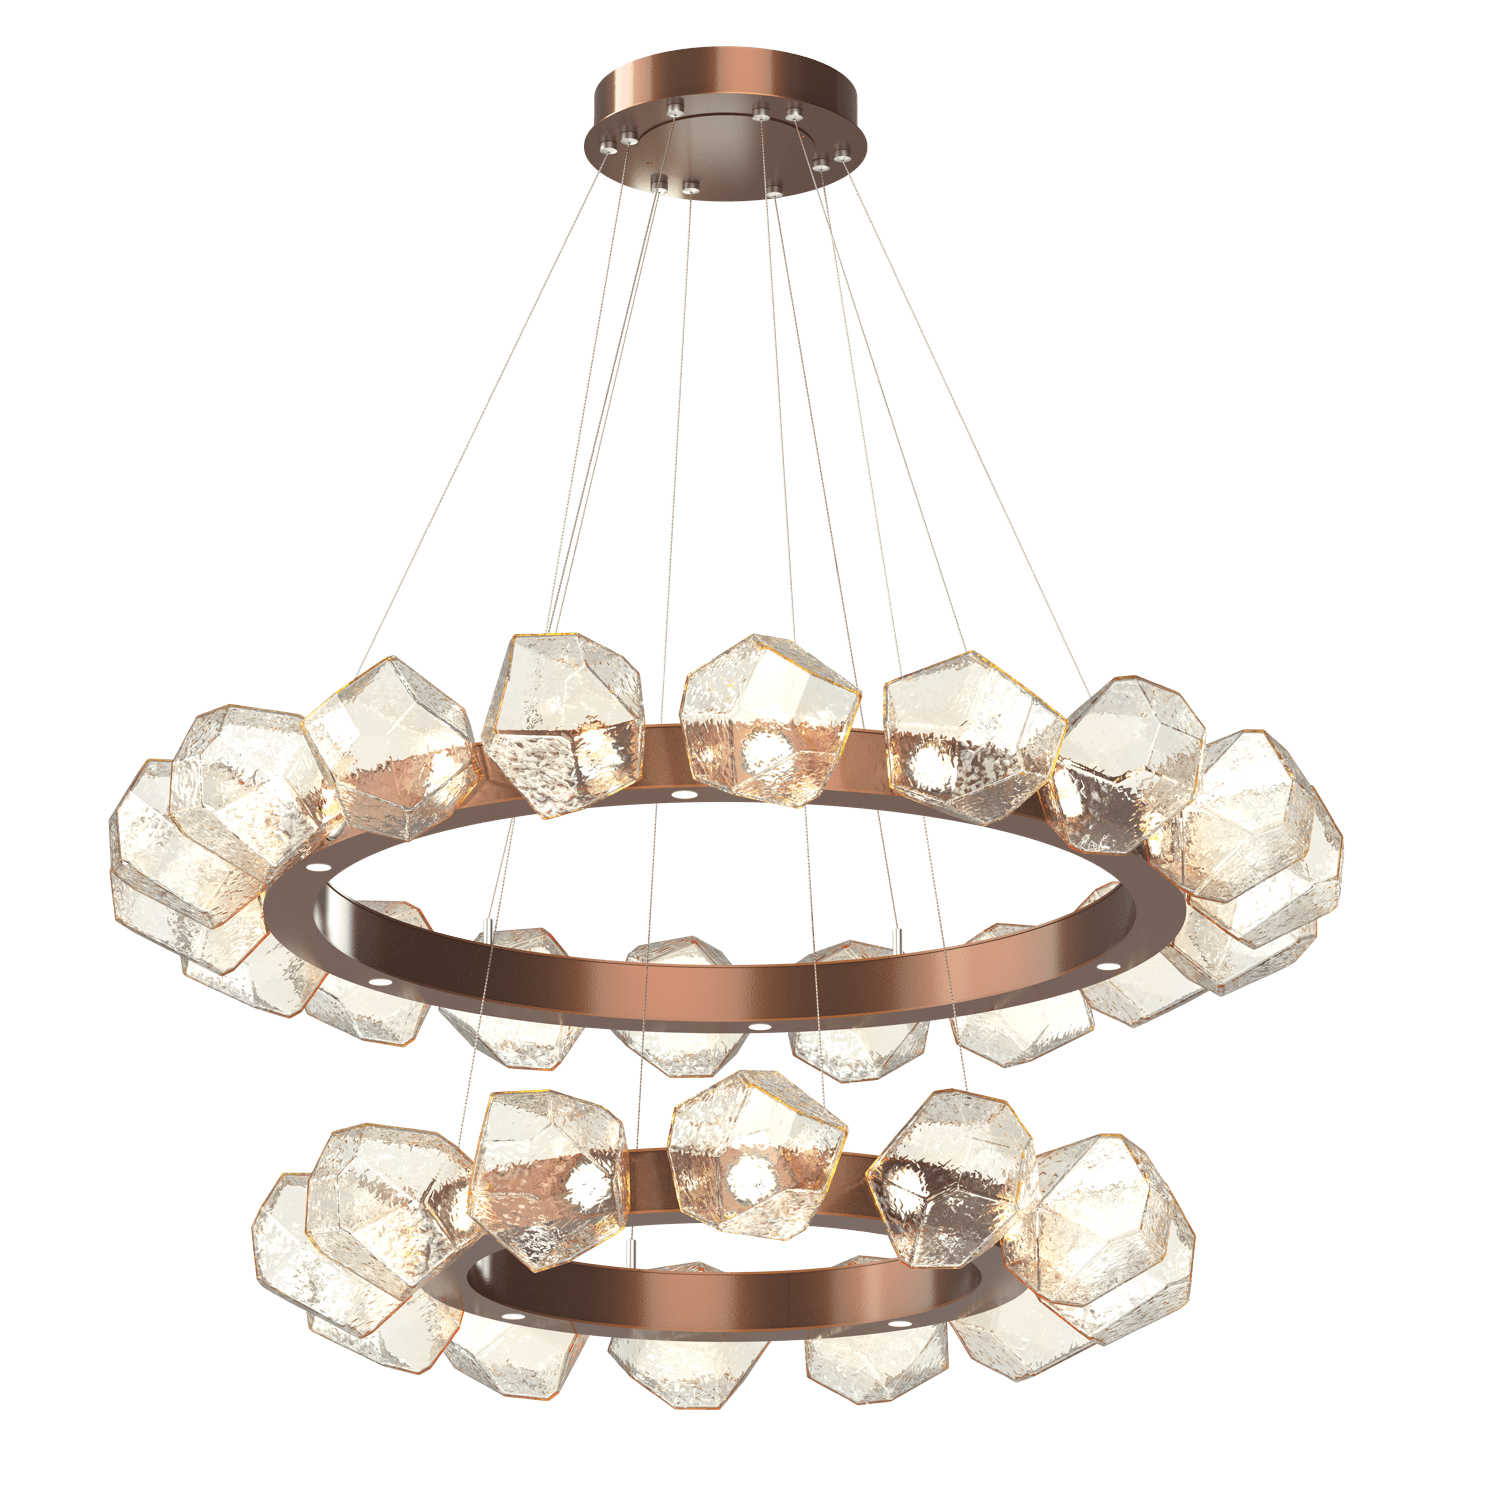 CHB0039-2T-BB-A-Hammerton-Studio-Gem-48-inch-two-tier-radial-ring-chandelier-with-burnished-bronze-finish-and-amber-blown-glass-shades-and-LED-lamping